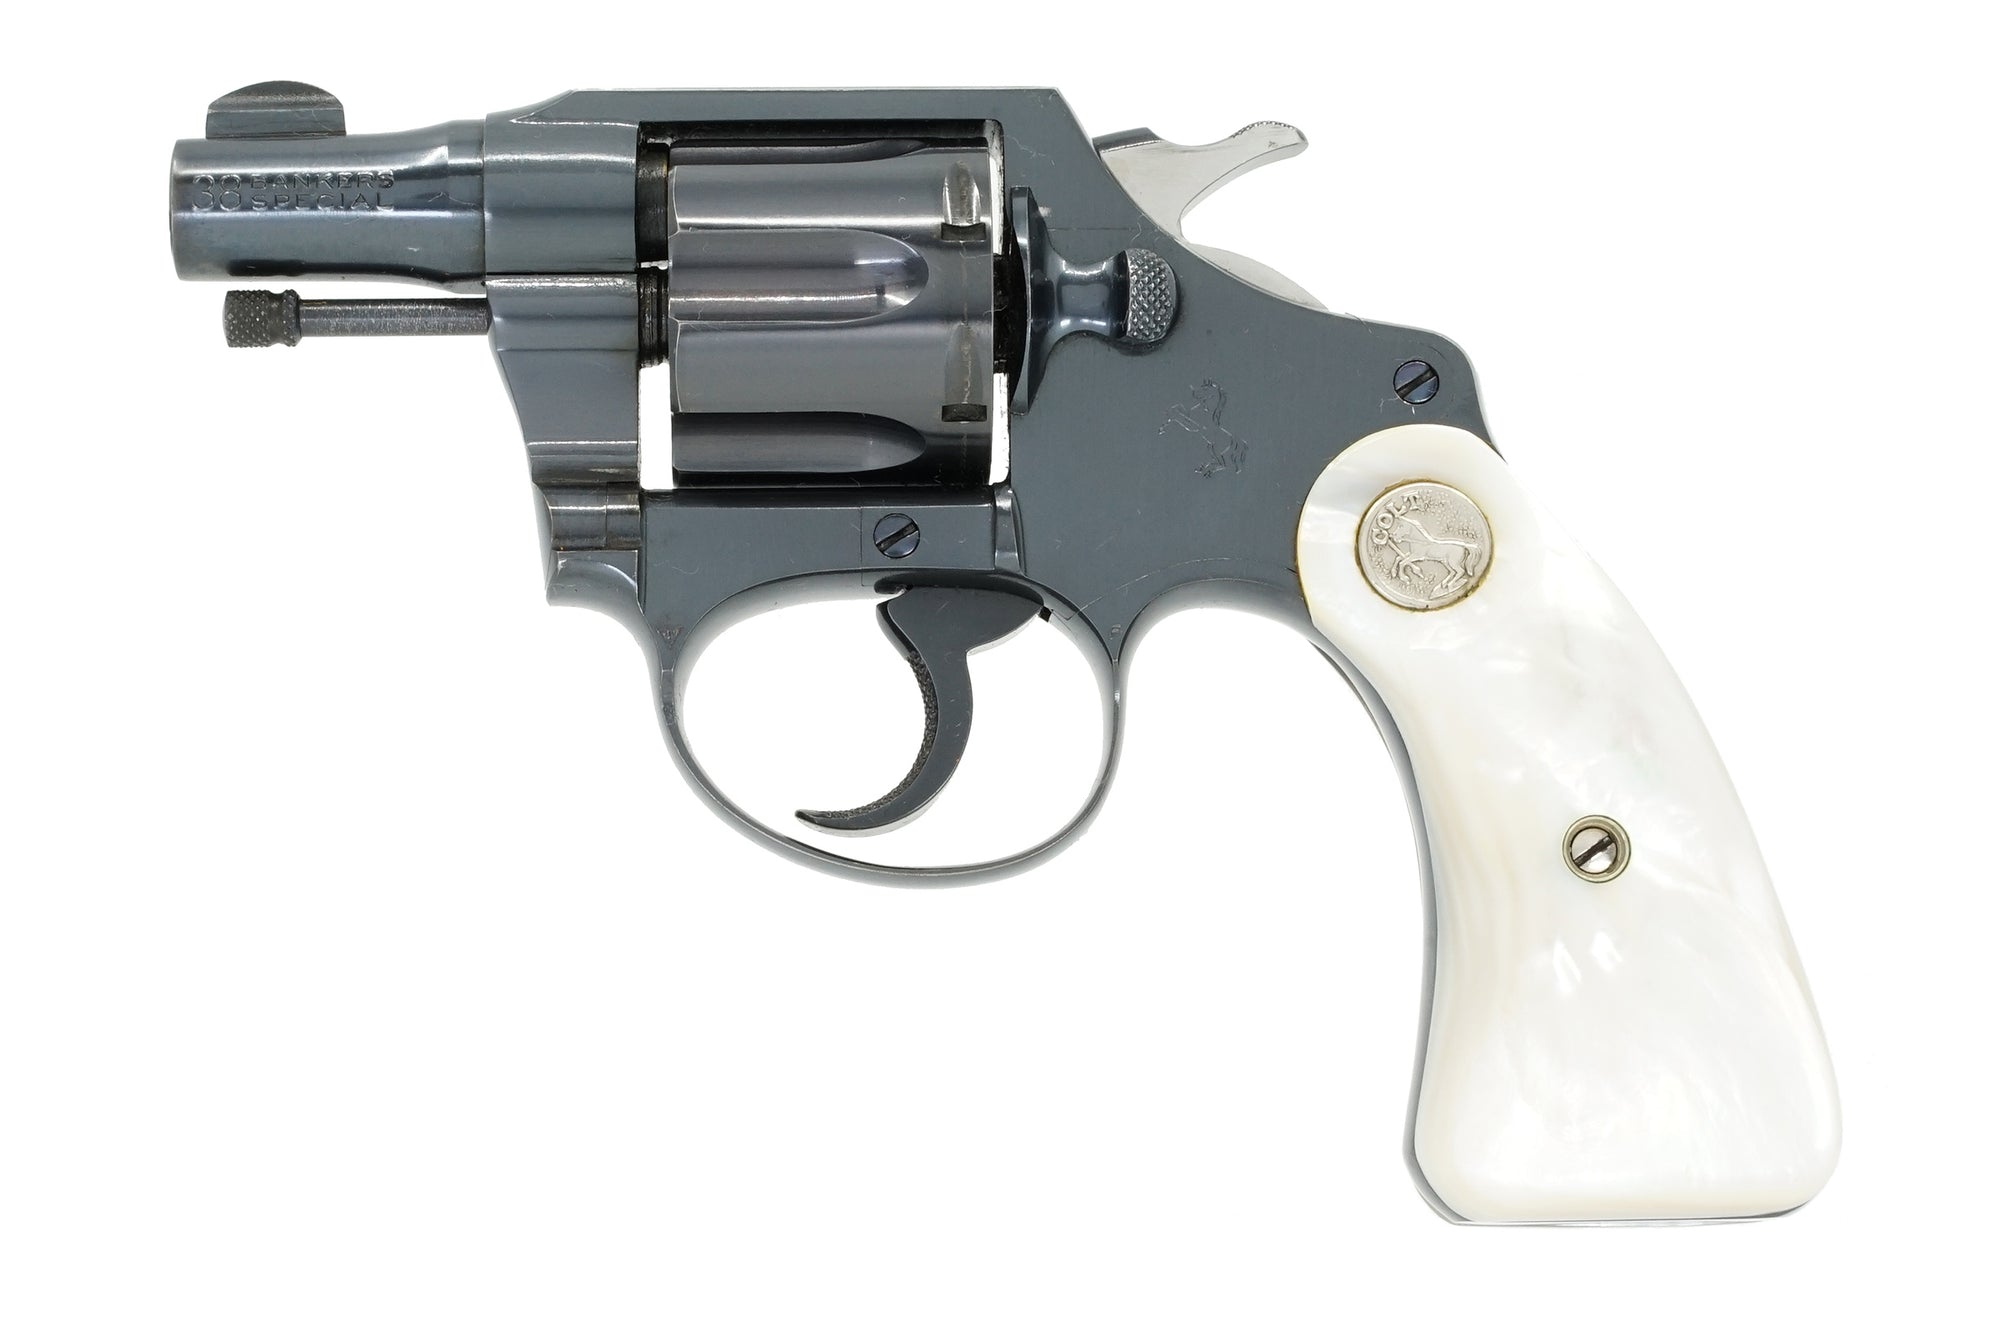 Colt Bankers Special 38 SN:398145 MFG:1947